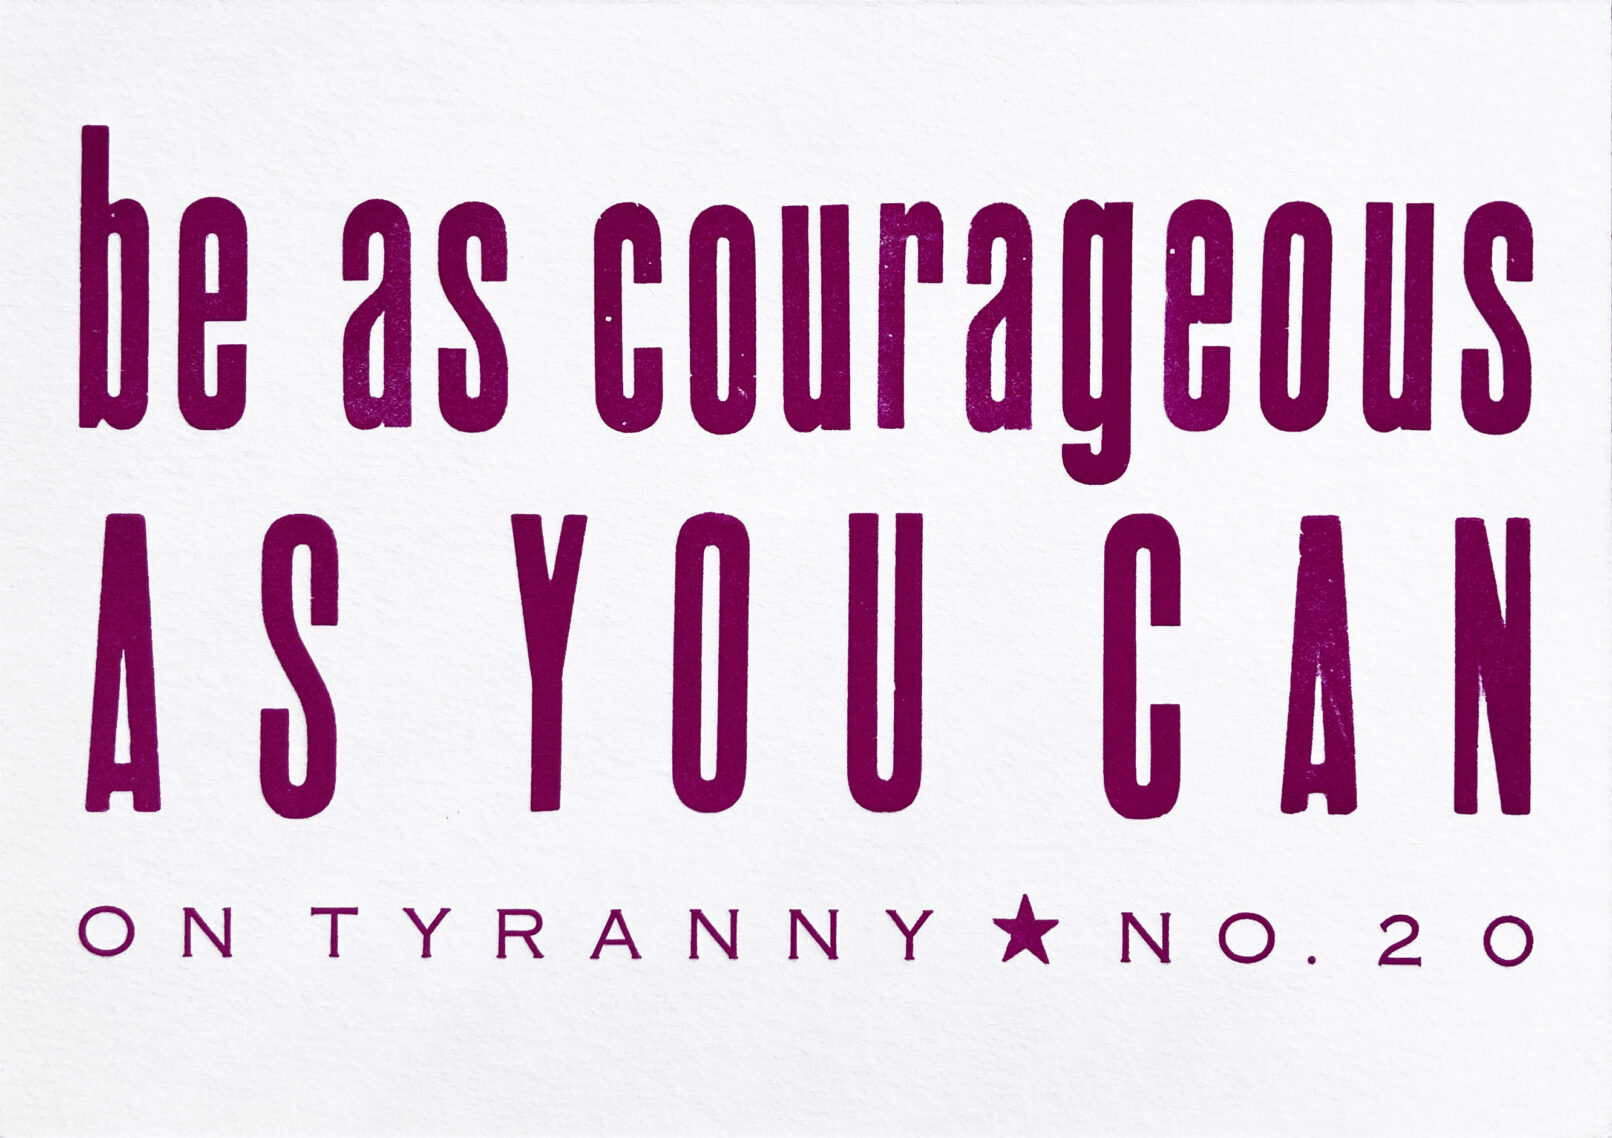 Letterpress print in plum purple ink on white paper with text that reads "Be As Courageous As You Can On Tyranny No. 20"